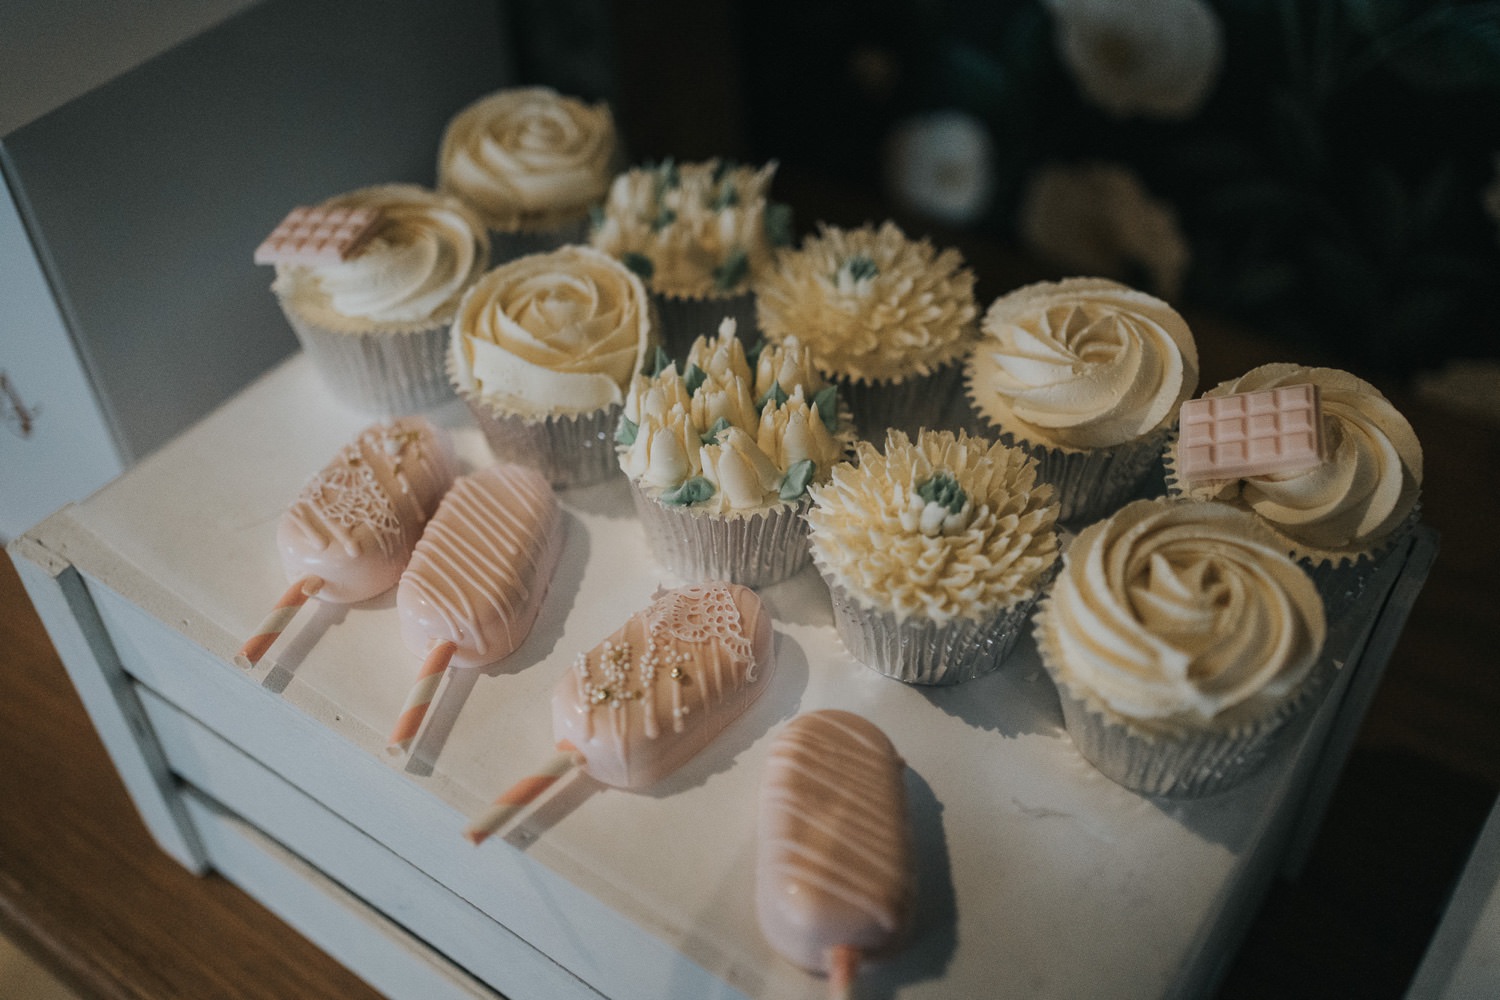 Wedding cupcakes at the Bothy Glasgow